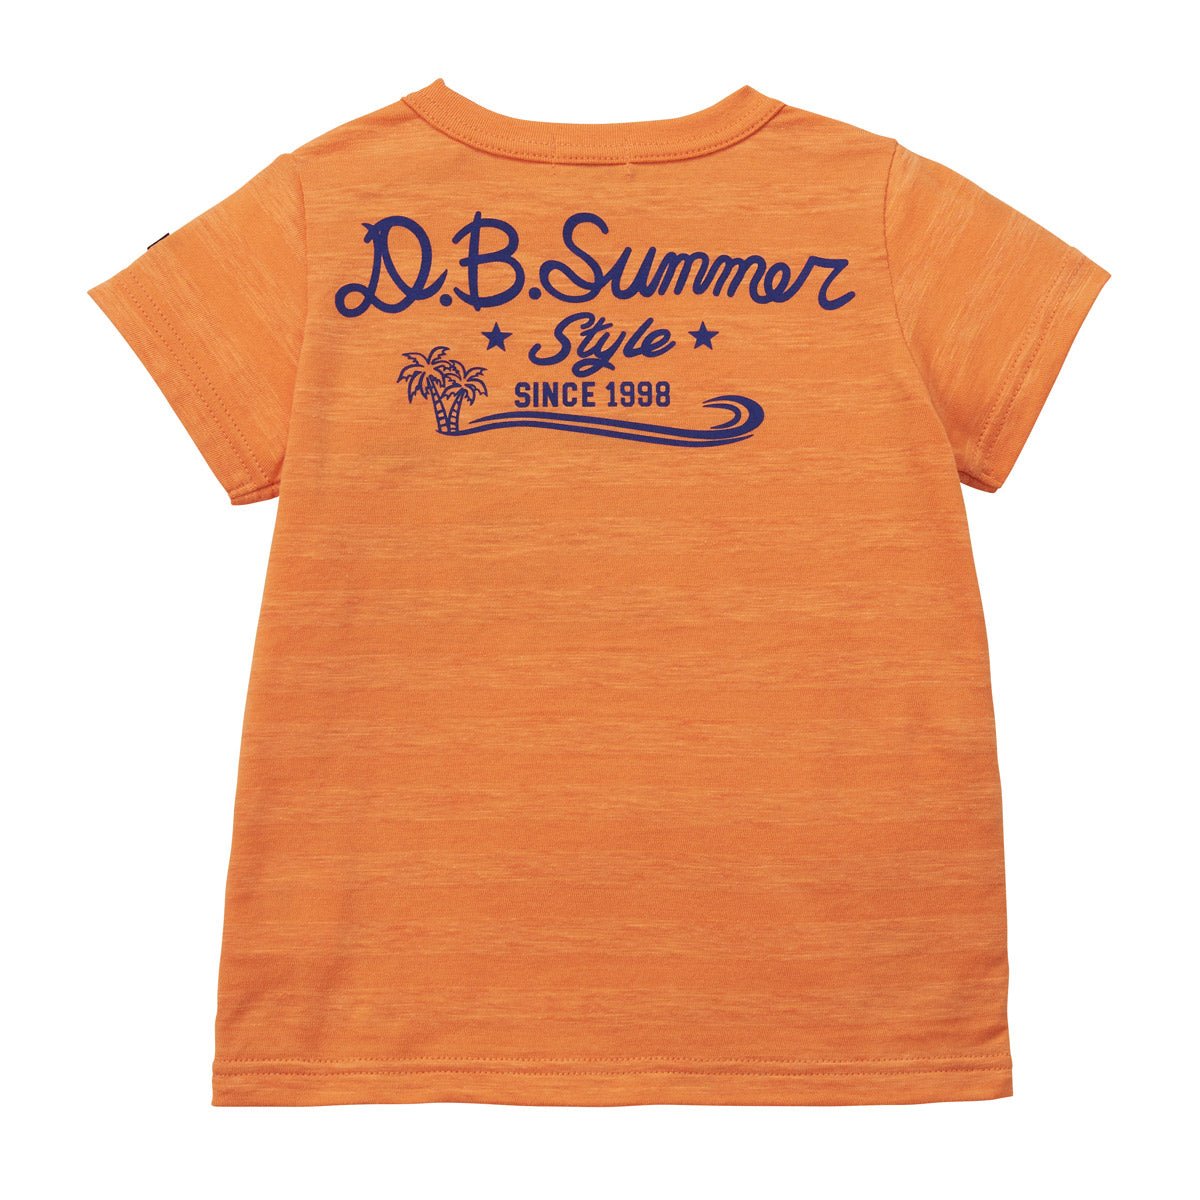 Surf with Style – DOUBLE_B Short Sleeve Tee - 62-5206-382-12-90